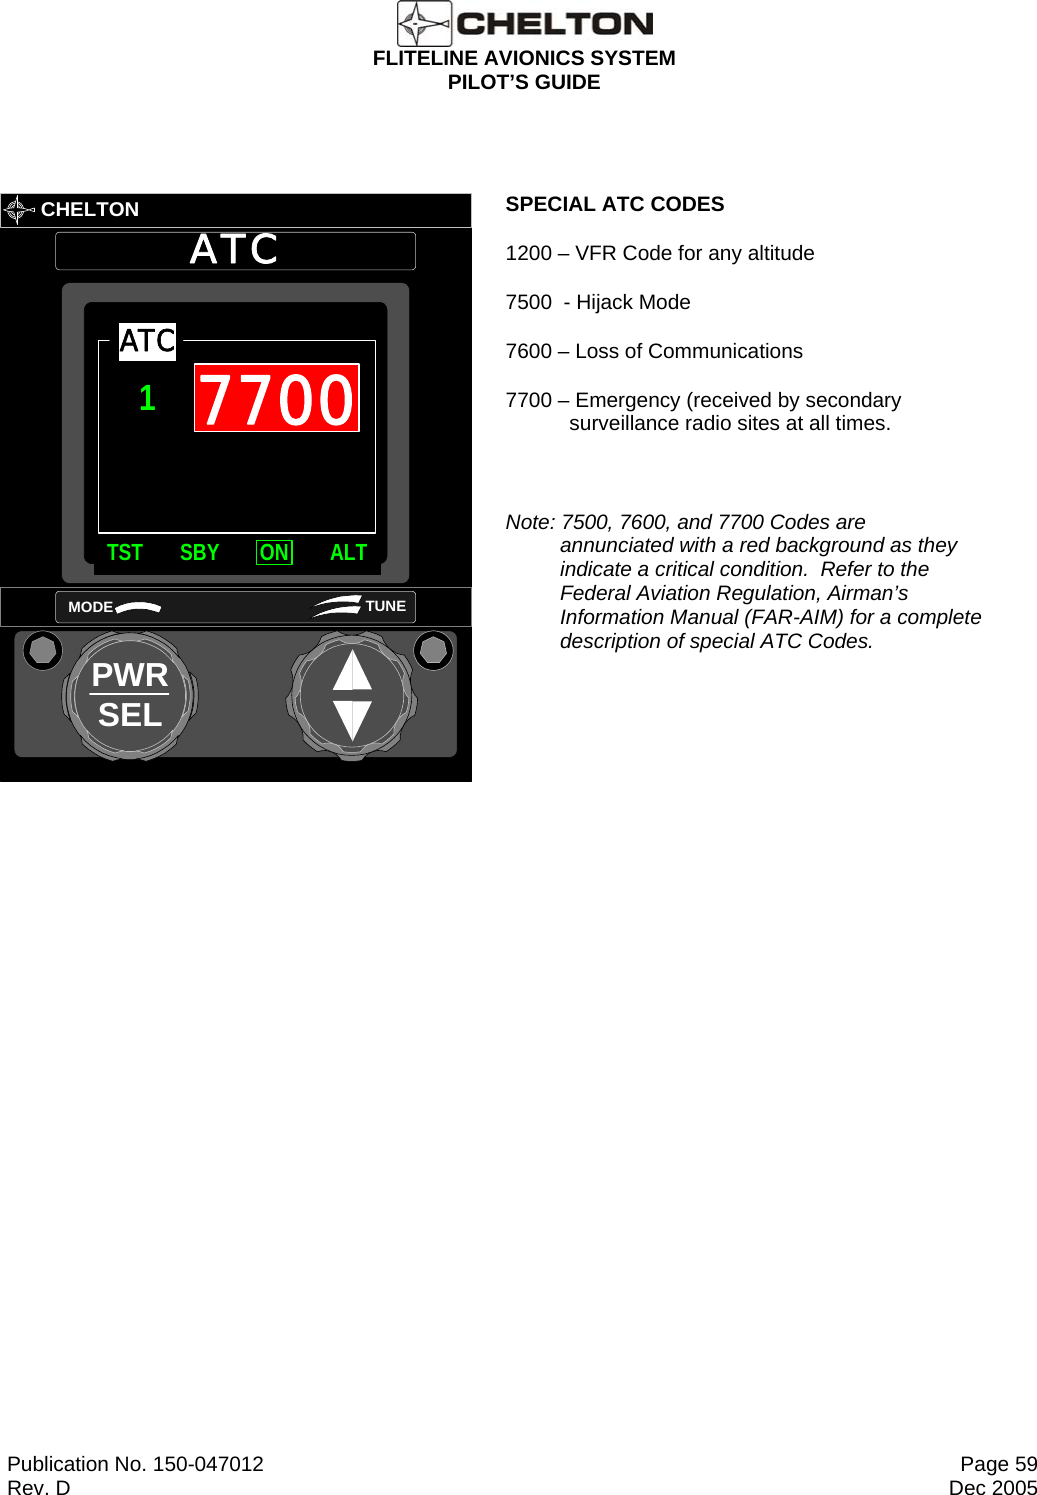  FLITELINE AVIONICS SYSTEM PILOT’S GUIDE  Publication No. 150-047012  Page 59 Rev. D  Dec 2005         CHELTONATCPWRSELMODE TUNETST SBY ON ALTATC17700 SPECIAL ATC CODES 1200 – VFR Code for any altitude 7500  - Hijack Mode 7600 – Loss of Communications 7700 – Emergency (received by secondary surveillance radio sites at all times.  Note: 7500, 7600, and 7700 Codes are annunciated with a red background as they indicate a critical condition.  Refer to the Federal Aviation Regulation, Airman’s Information Manual (FAR-AIM) for a complete description of special ATC Codes.  